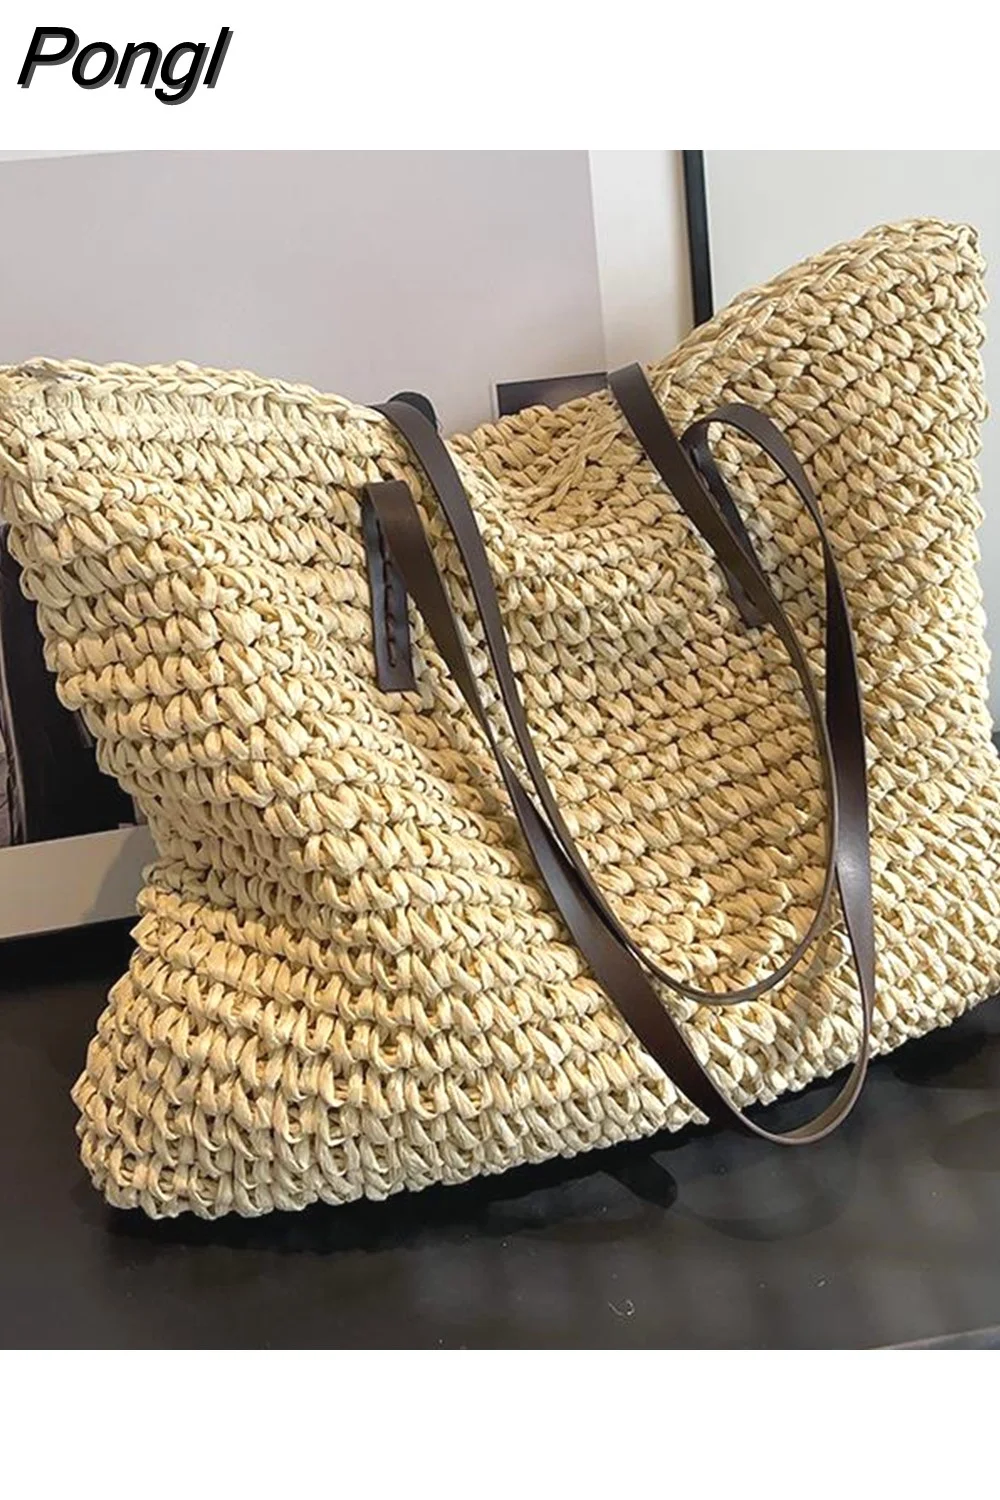 Pongl Design Straw Woven Tote Bags Summer Casual Large Capacity Handbags New Fashion Beach Women Shoulder Simple Style Shopping